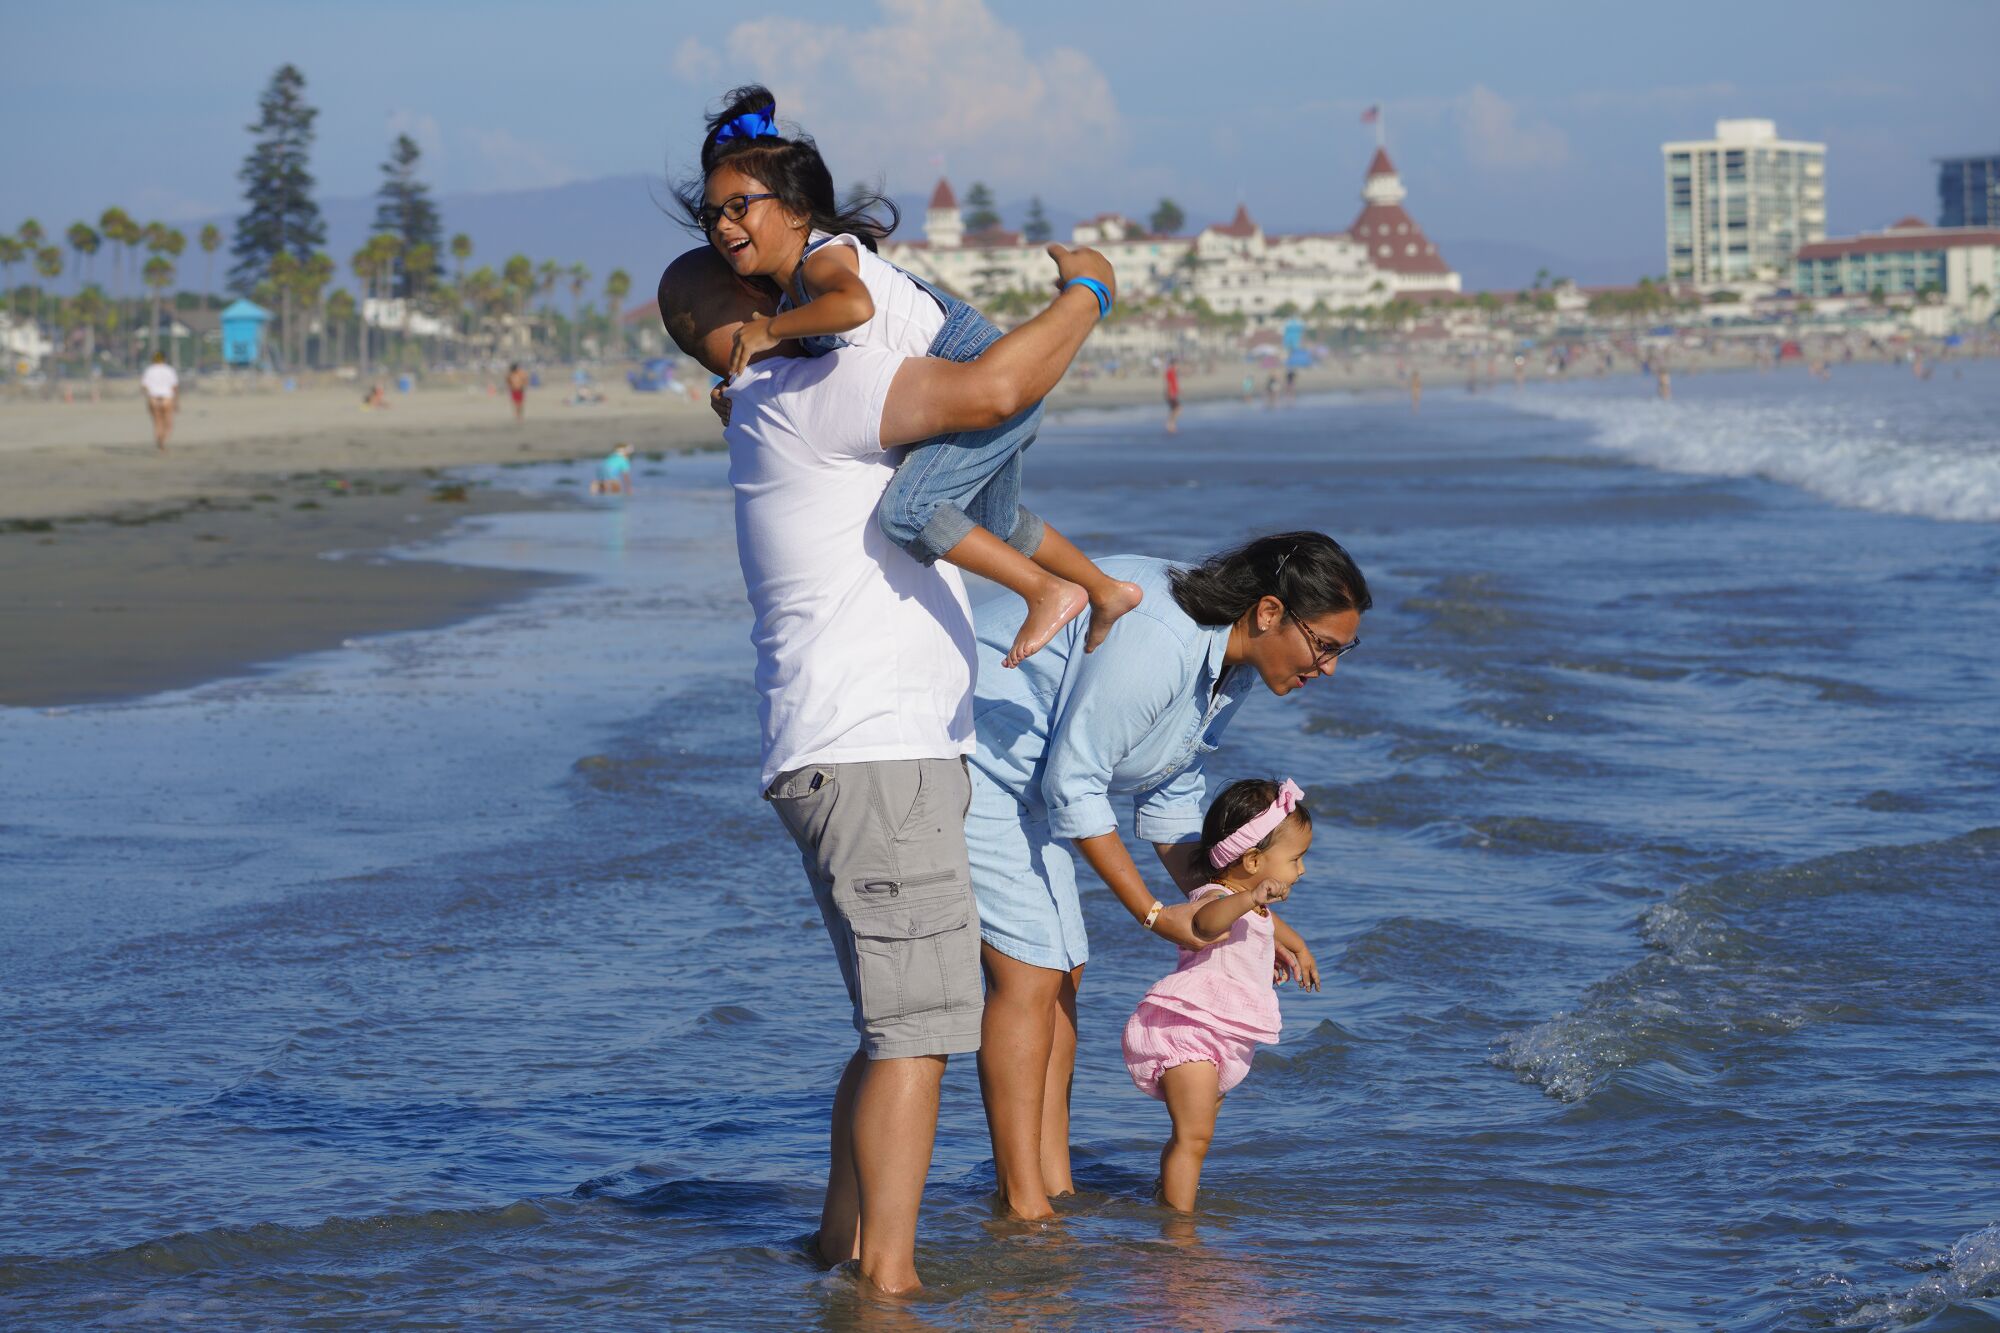 A family with two young daughters plays in the water on a beach